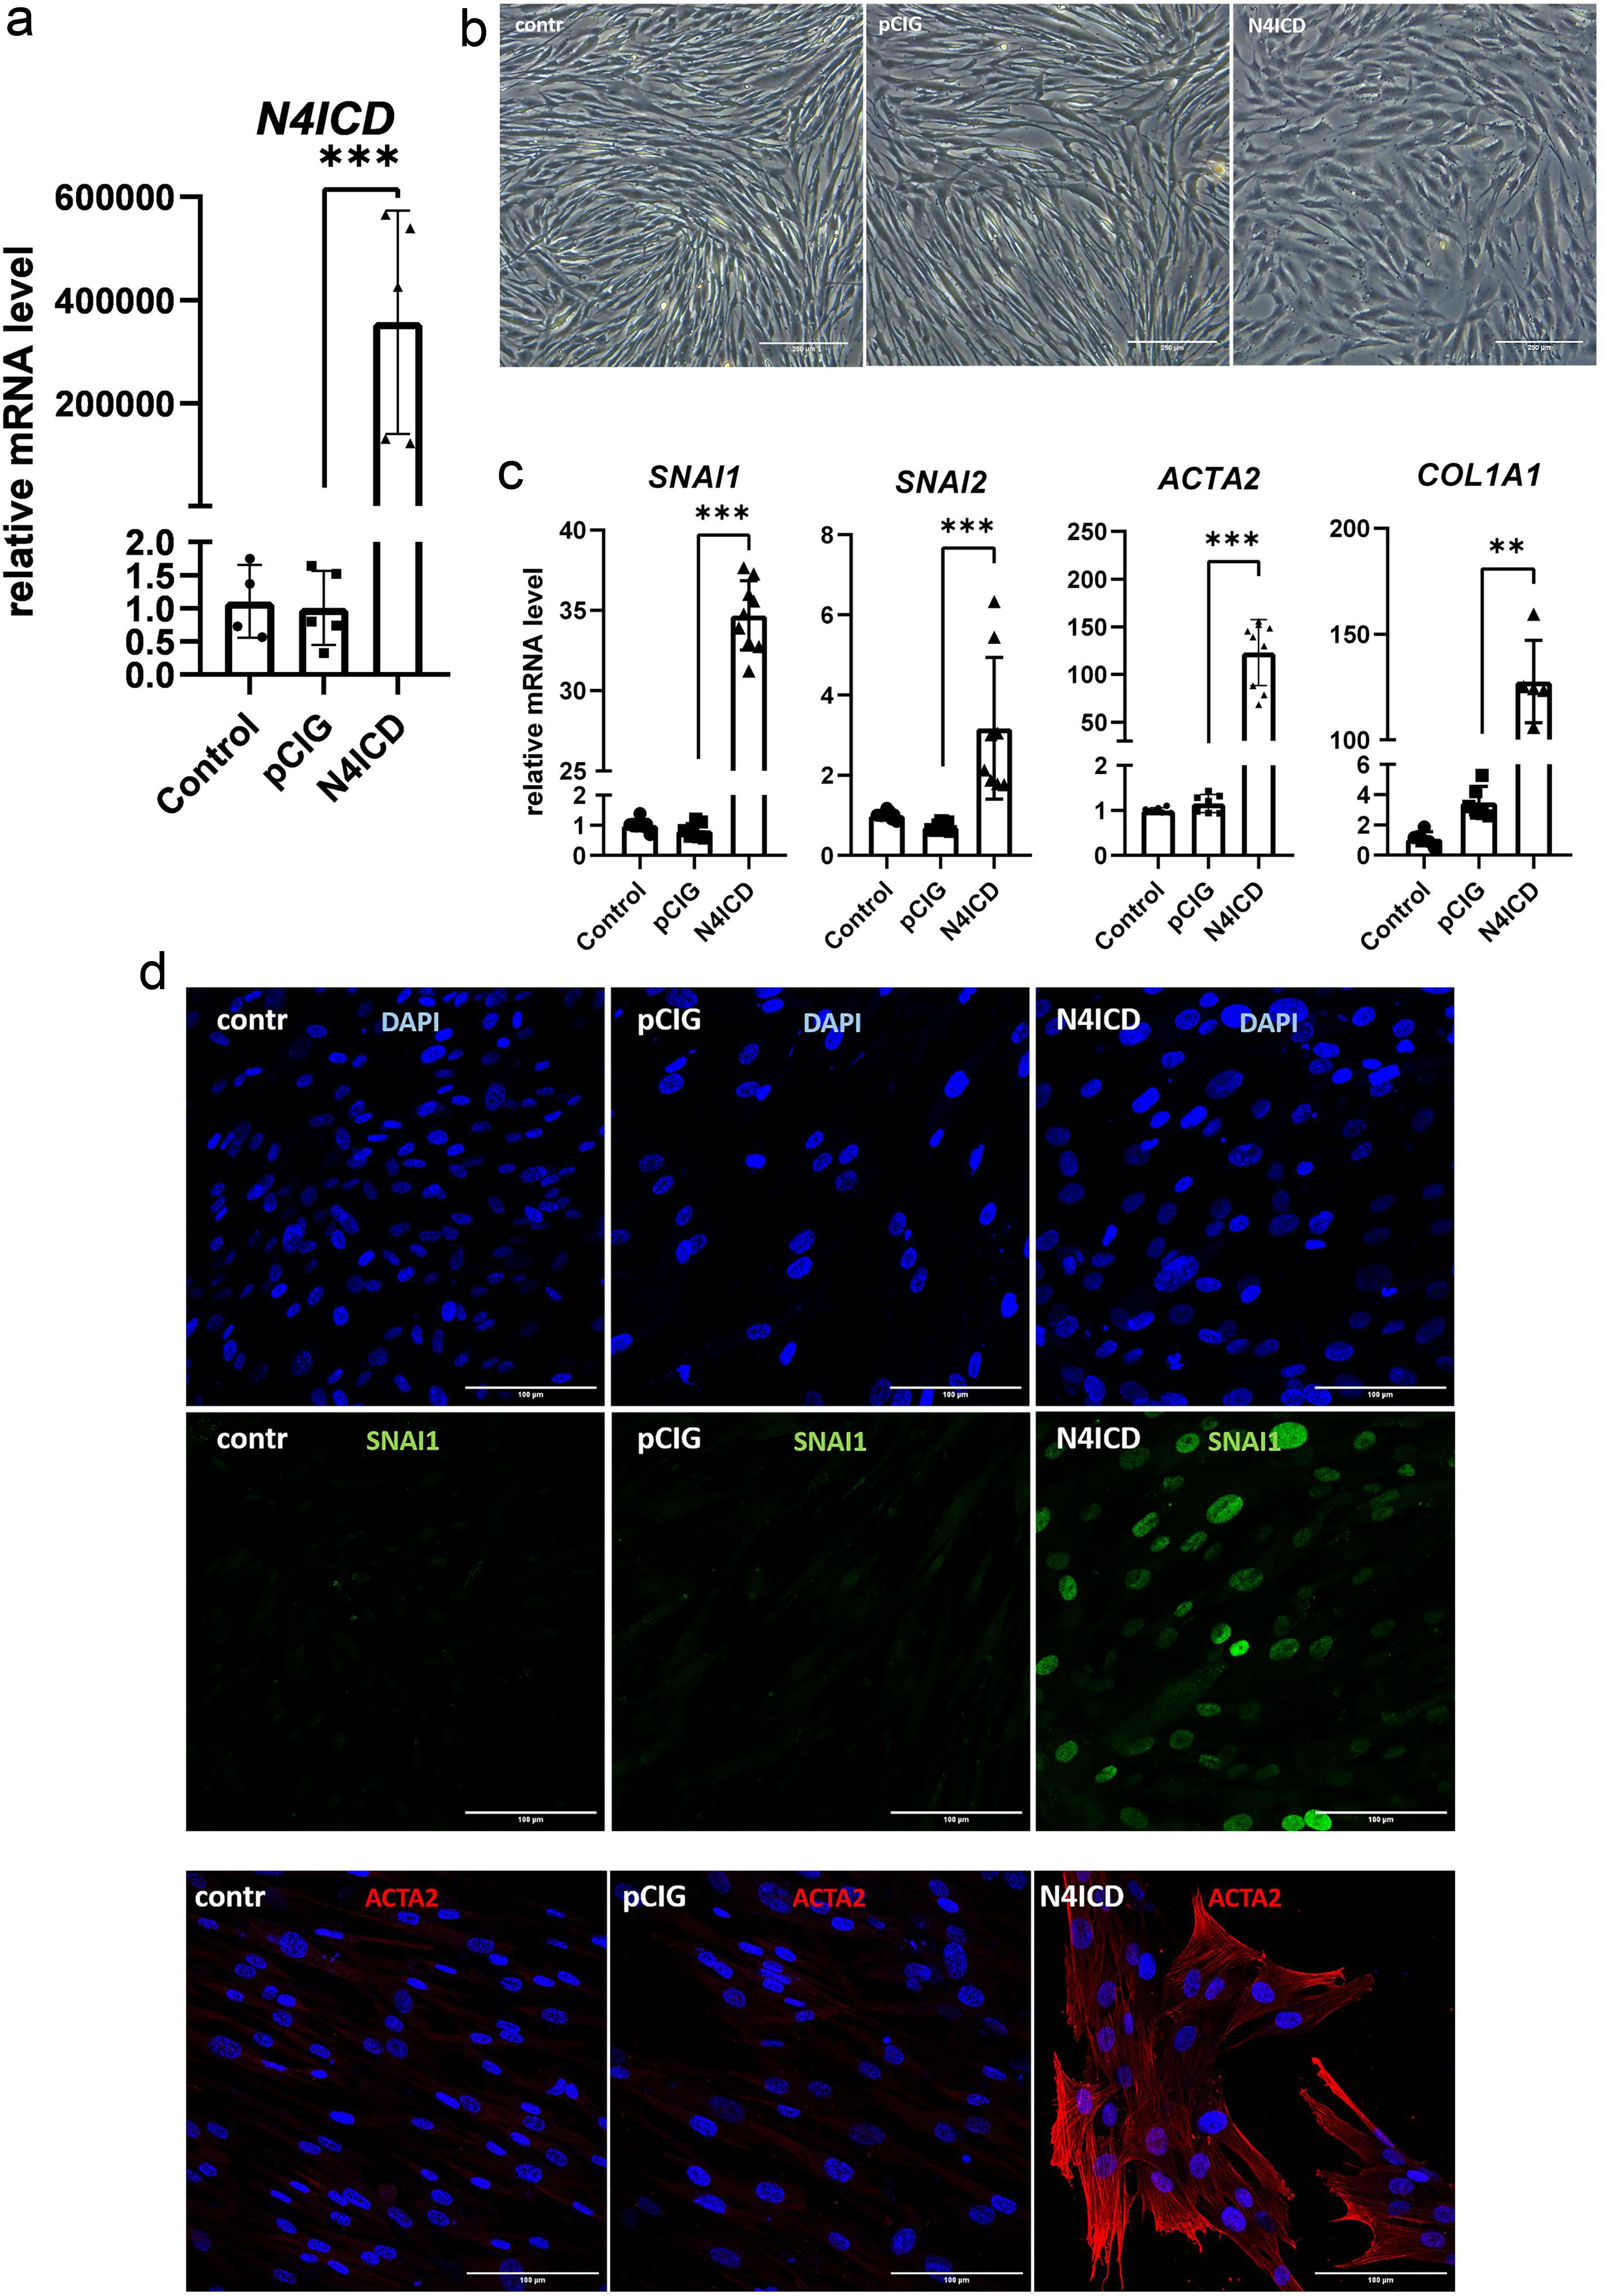 Induction of fibrogenesis-associated genes in human lung fibroblasts on day 3 after N4ICD transduction.